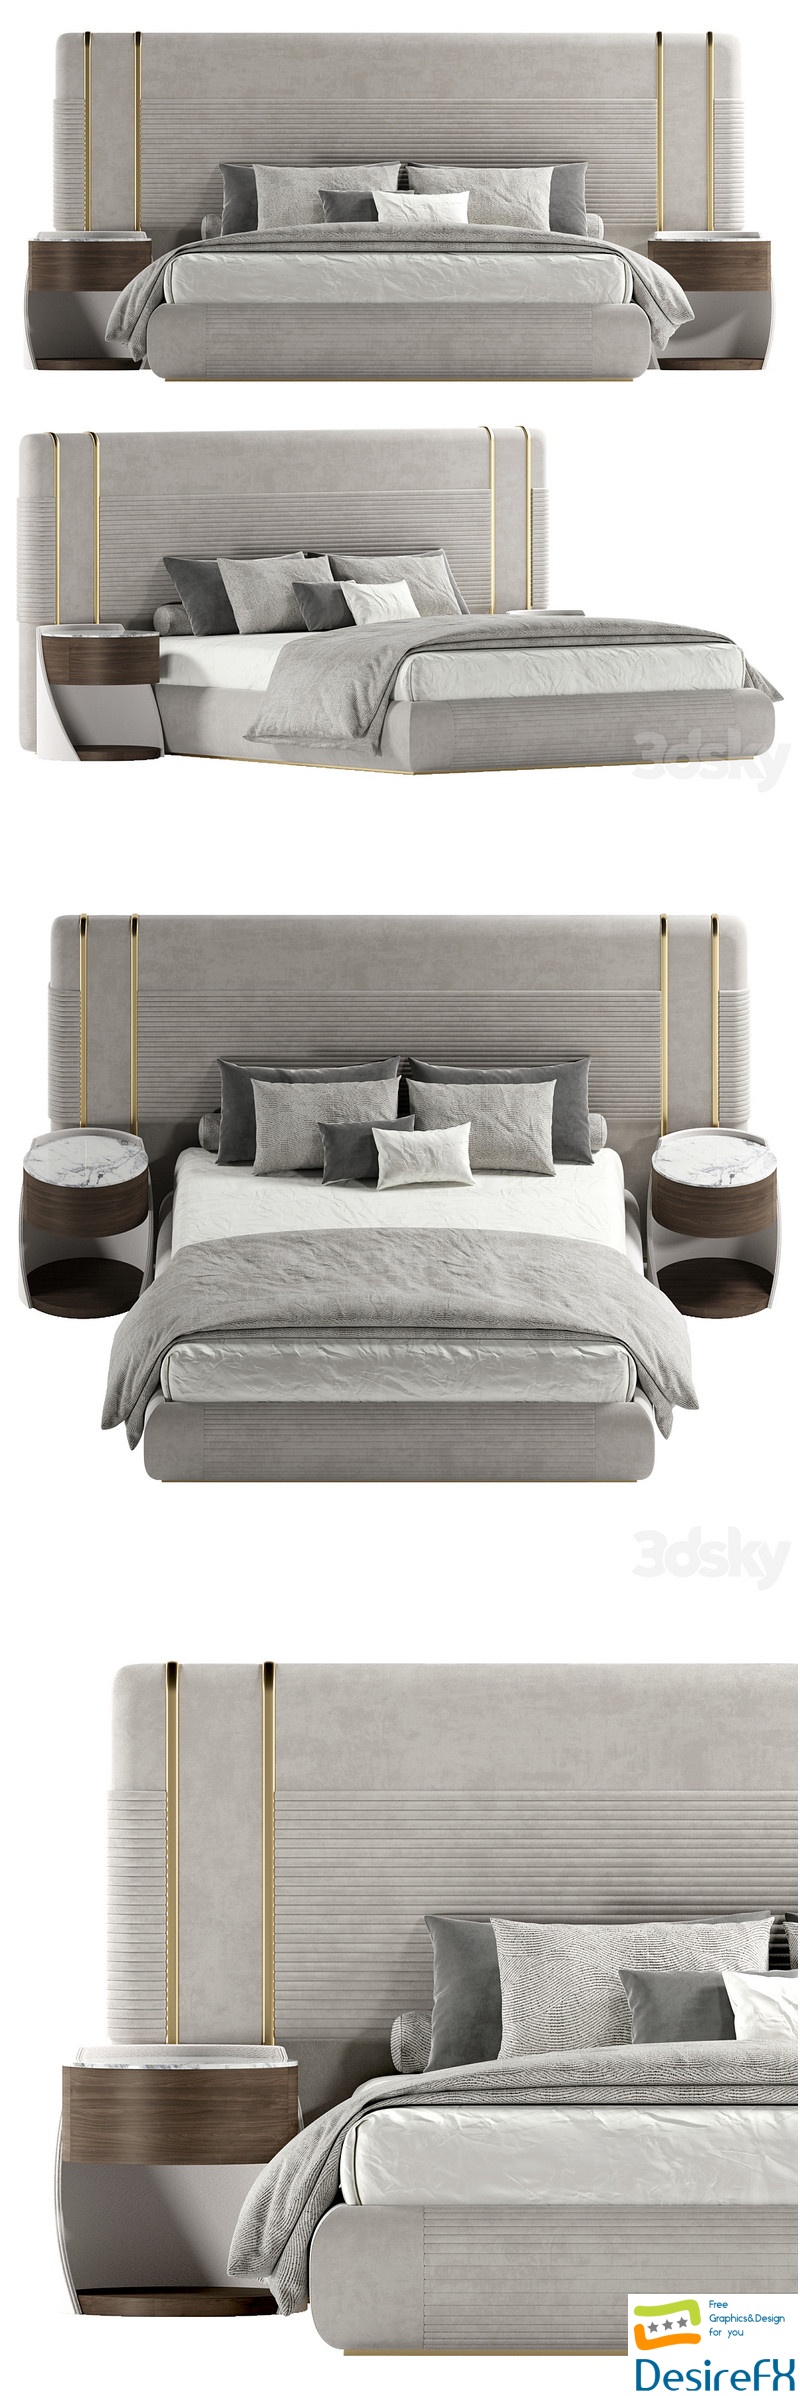 Capital Collection - Frey bed 3D Model